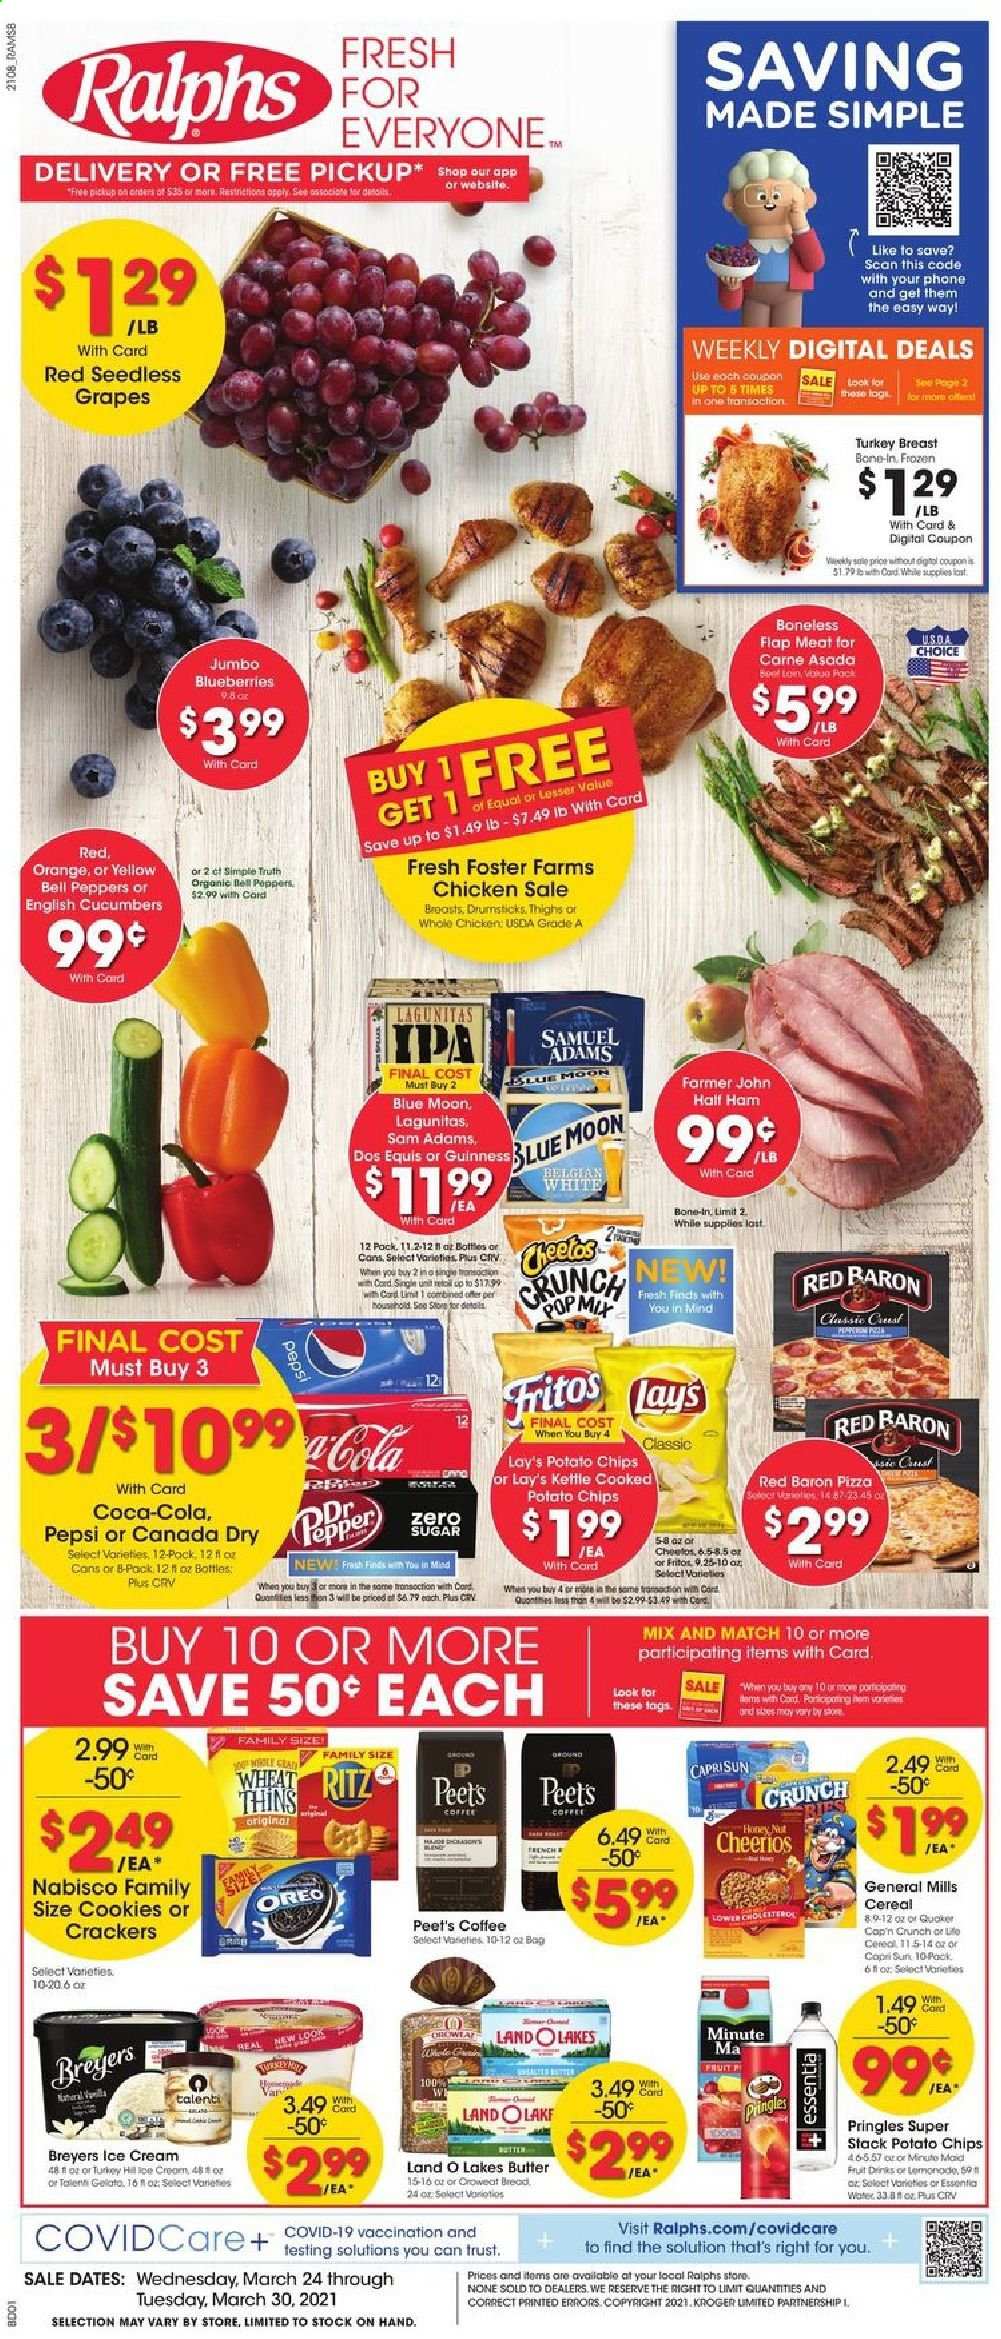 thumbnail - Ralphs Flyer - 03/24/2021 - 03/30/2021 - Sales products - Trust, blueberries, seedless grapes, bread, pizza, ham, Oreo, butter, ice cream, Talenti Gelato, gelato, bell peppers, Red Baron, cookies, crackers, RITZ, potato chips, Pringles, Cheetos, Lay’s, Thins, cucumber, cereals, Fritos, Cheerios, Cap'n Crunch, Canada Dry, Coca-Cola, Pepsi, coffee, beer, Dos Equis, Blue Moon, Guinness, IPA, turkey breast, whole chicken, half ham, cap, grapes. Page 1.